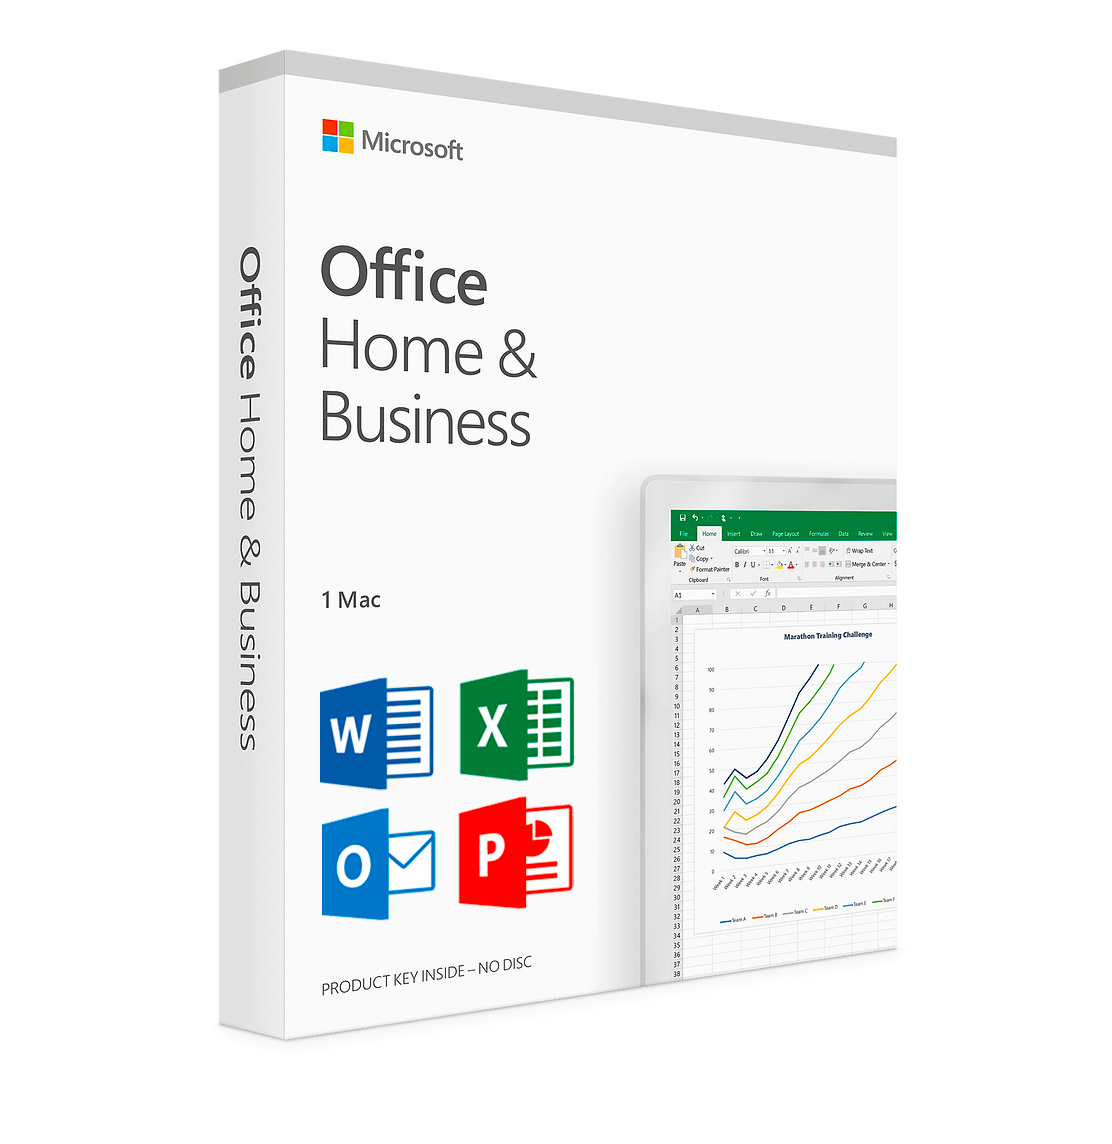 Home and business 2019. Microsoft Office 2019 Home and Business. Office 2021 Pro Plus. Microsoft Office 2019 Home and Business, Box. Office 2021 Home and Business.